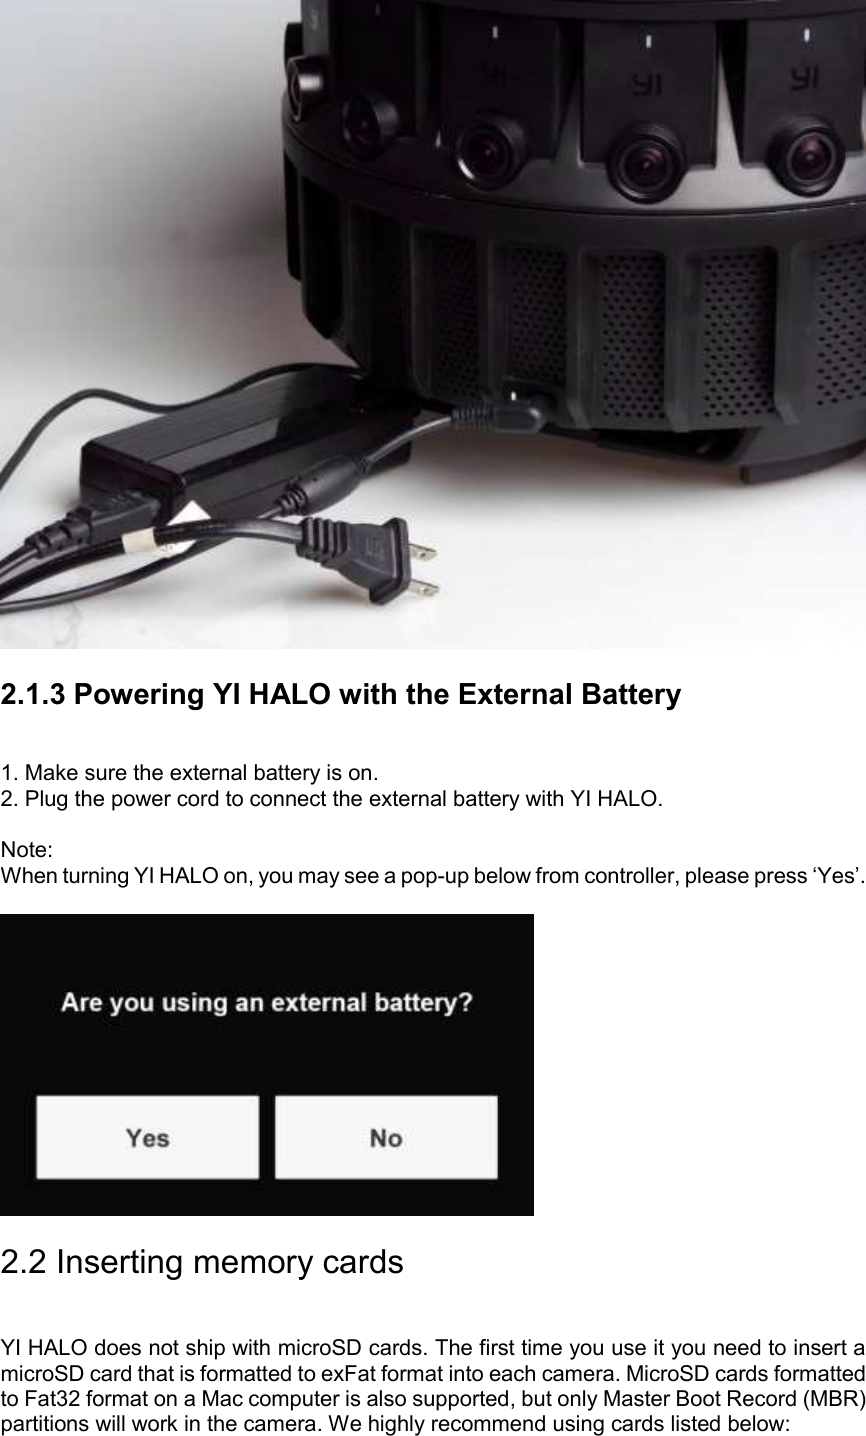  2.1.3 Powering YI HALO with the External Battery 1. Make sure the external battery is on.  2. Plug the power cord to connect the external battery with YI HALO.  Note: When turning YI HALO on, you may see a pop-up below from controller, please press ‘Yes’.   2.2 Inserting memory cards YI HALO does not ship with microSD cards. The first time you use it you need to insert a microSD card that is formatted to exFat format into each camera. MicroSD cards formatted to Fat32 format on a Mac computer is also supported, but only Master Boot Record (MBR) partitions will work in the camera. We highly recommend using cards listed below: 